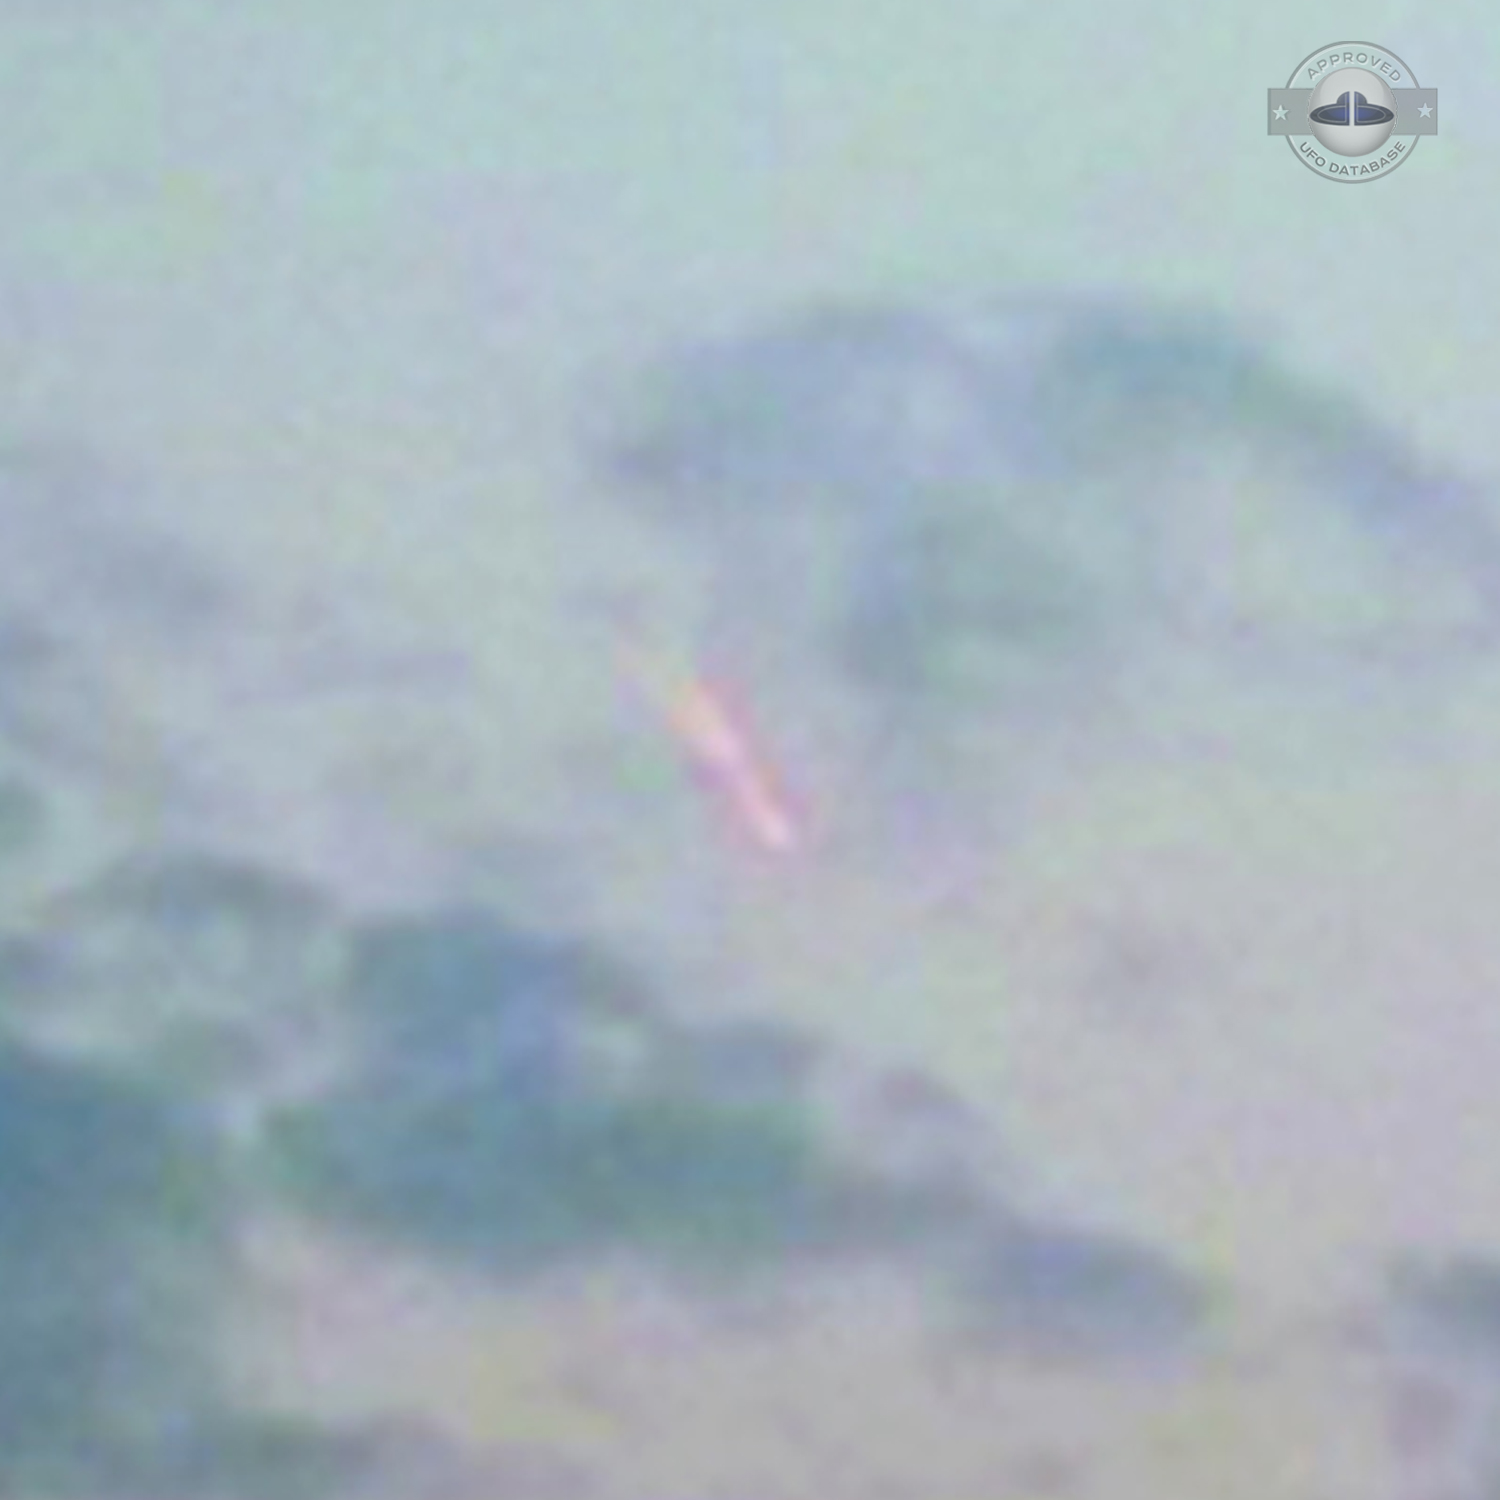 Fire Dragon UFO with glowing tail in clouds over Hefei China | 2011 UFO Picture #234-3